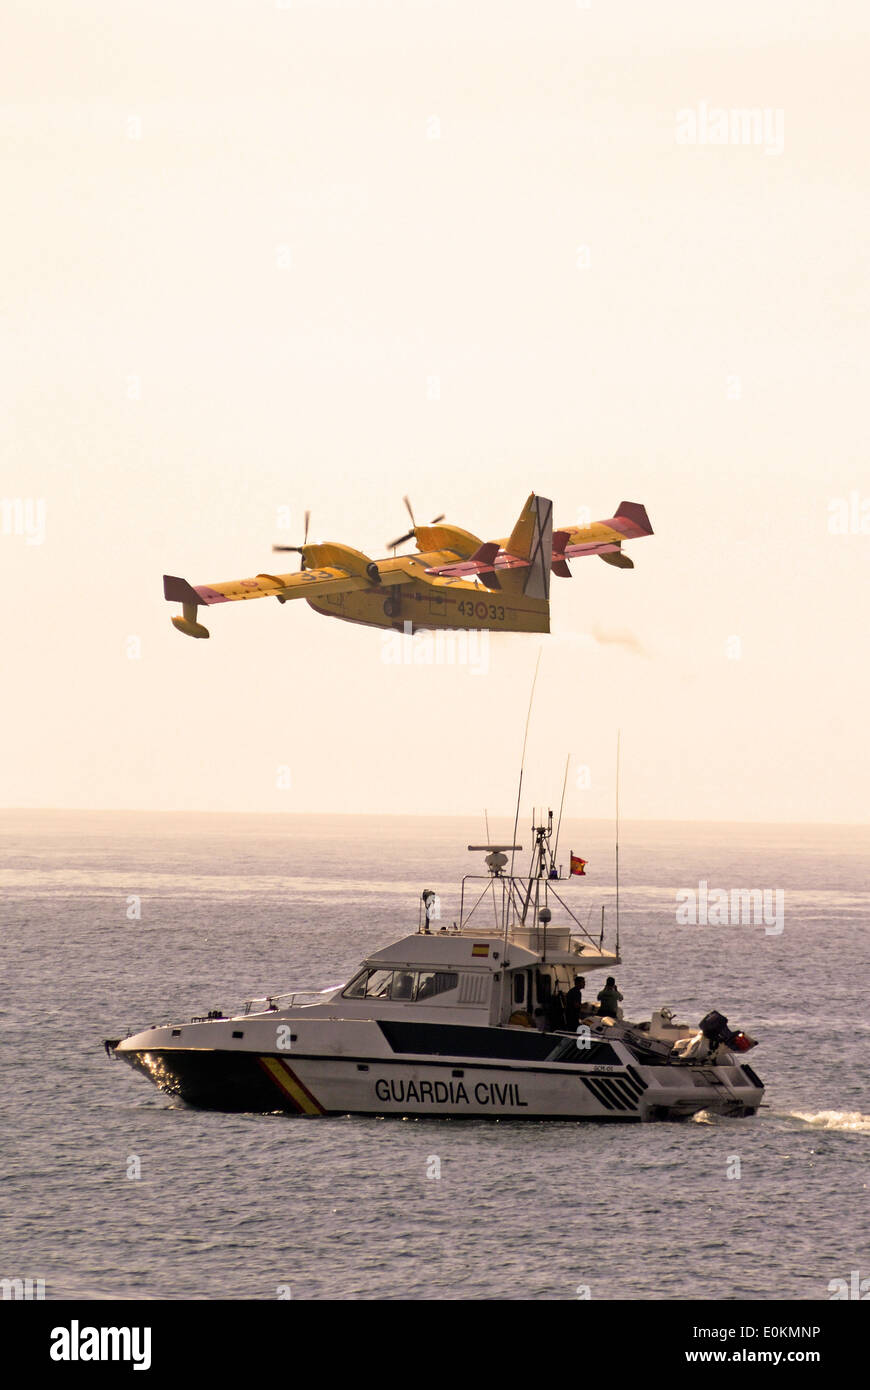 Firebomber flying over Guardia Civil Boat, Andalusia, Spain. Stock Photo